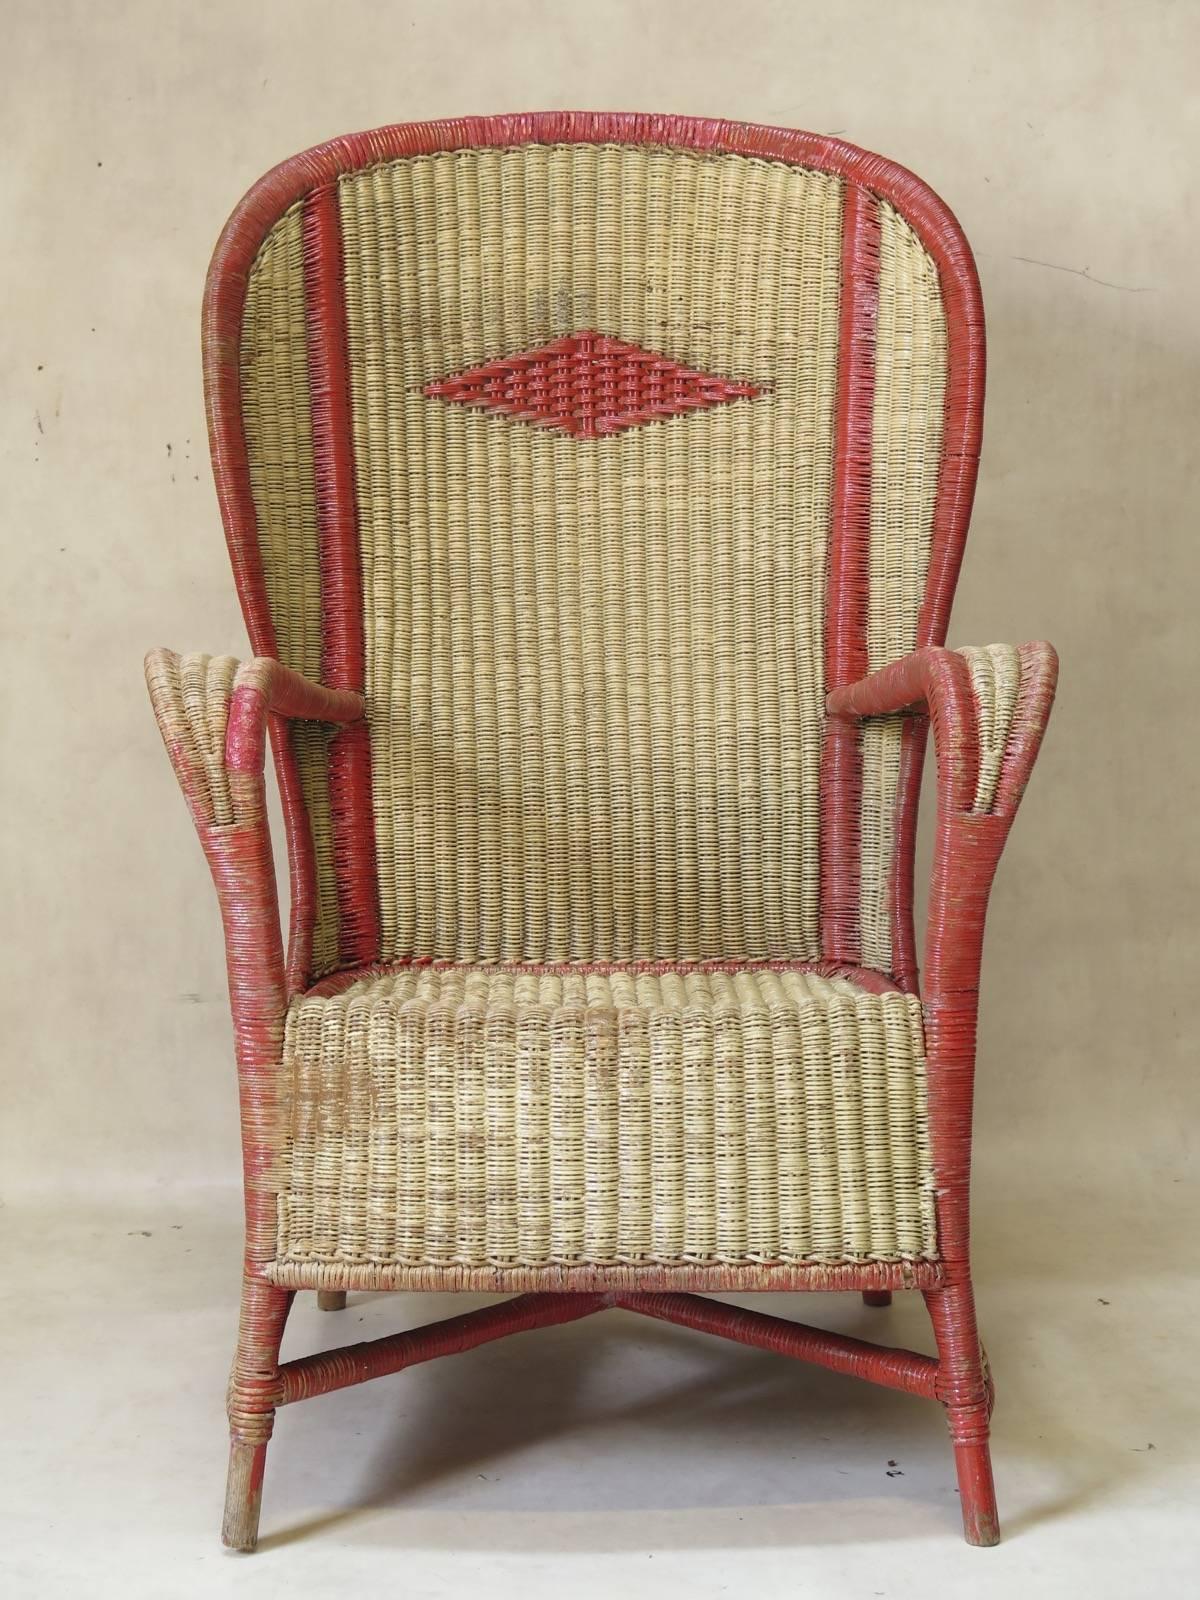 Unusual and very large wingback chair, of tightly-woven, fine wicker, with a tall, rounded back, painted cream and red. Diamond-shaped detail in the back.